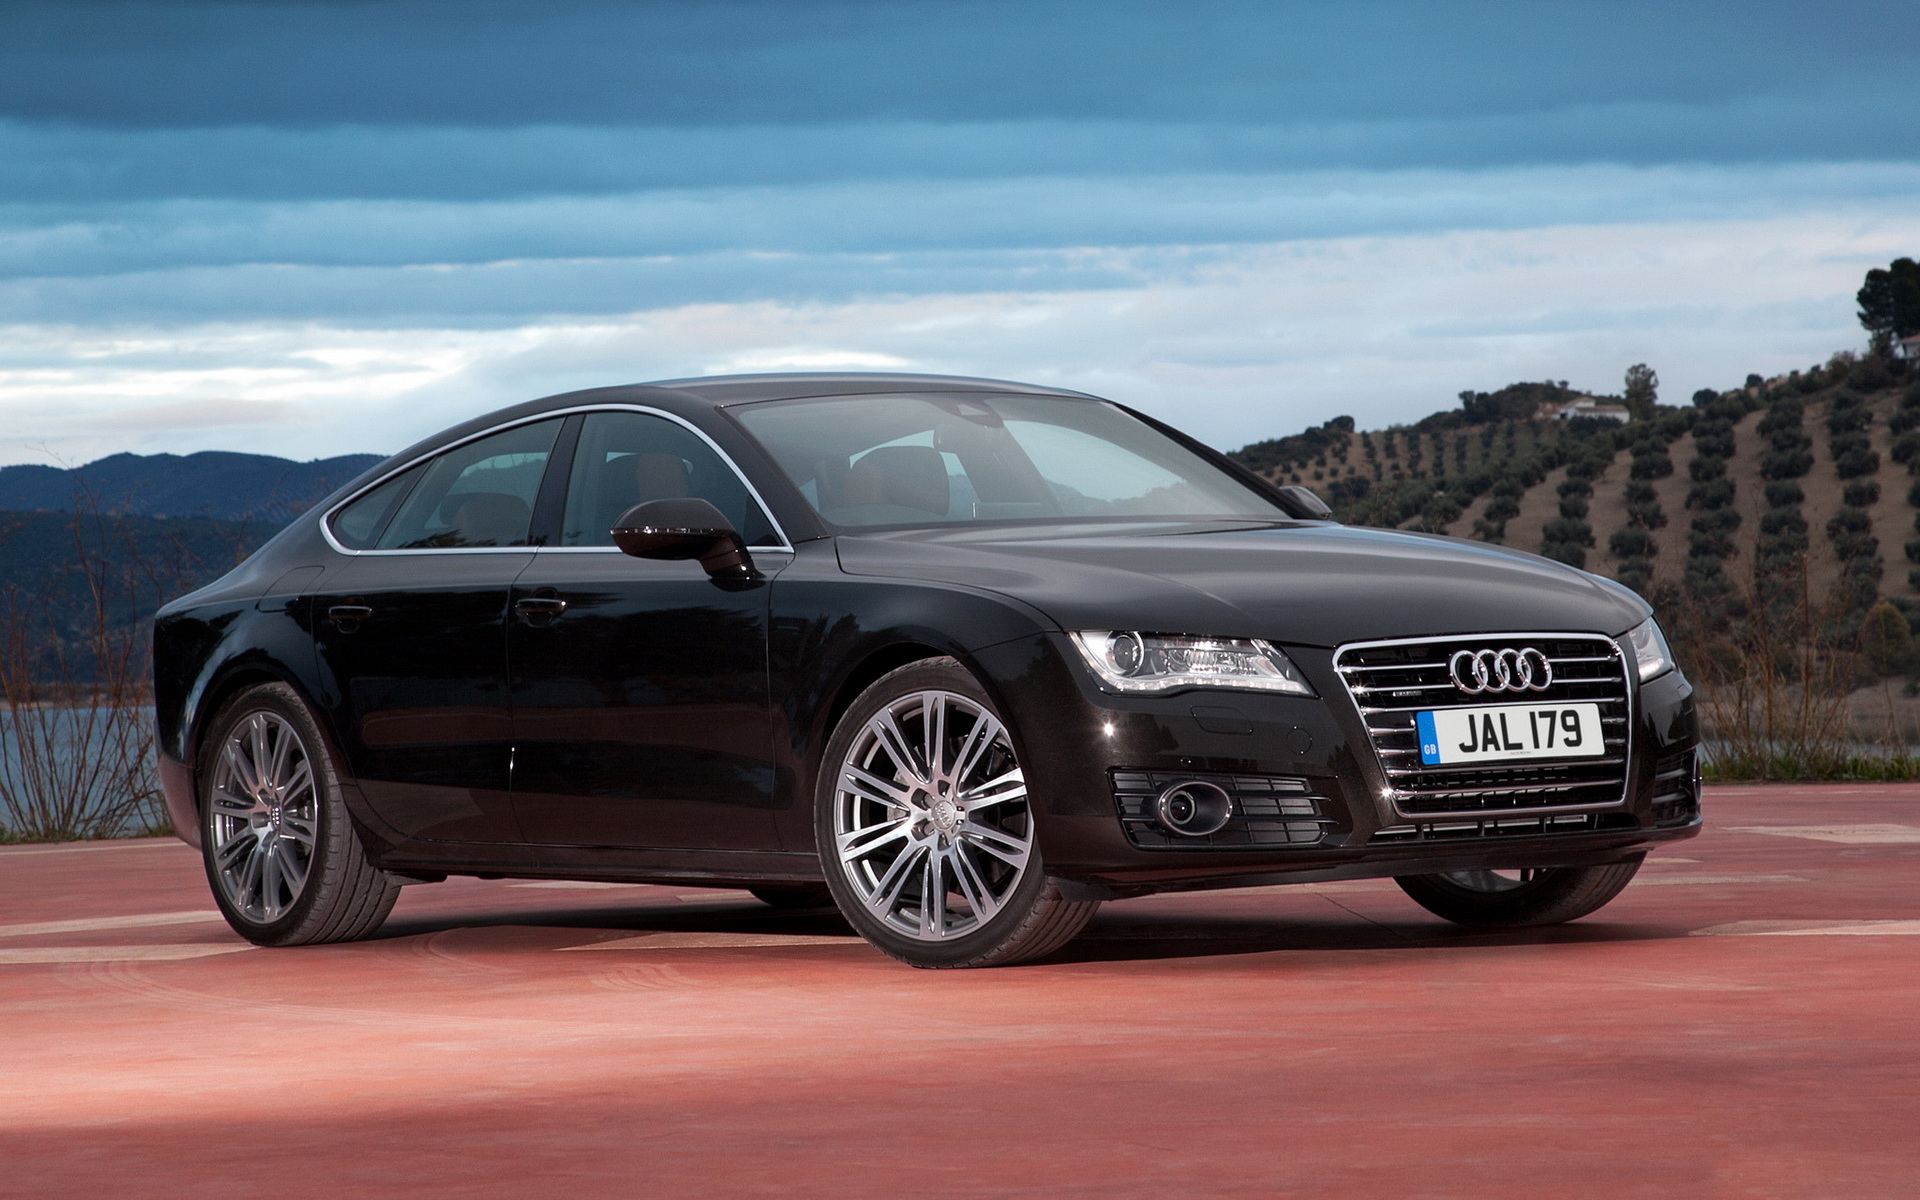 New Audi A7 Sportback Wallpaper And Image